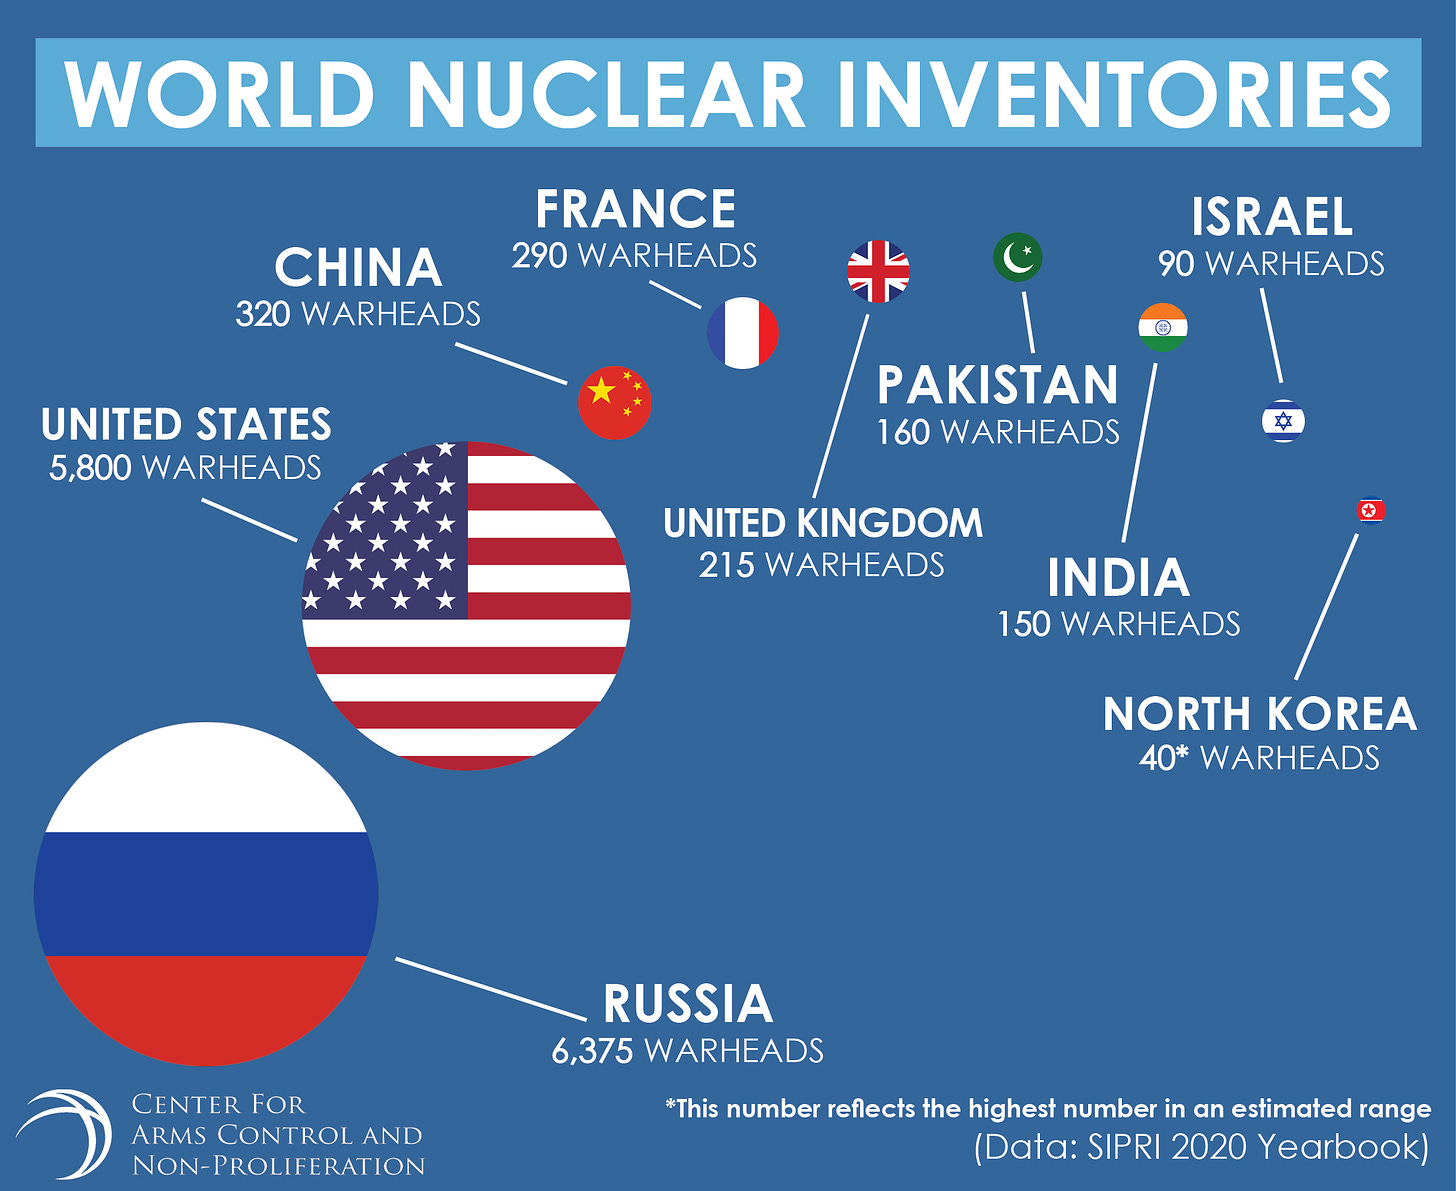 World Nuclear Inventories - Center for Arms Control and Non-Proliferation